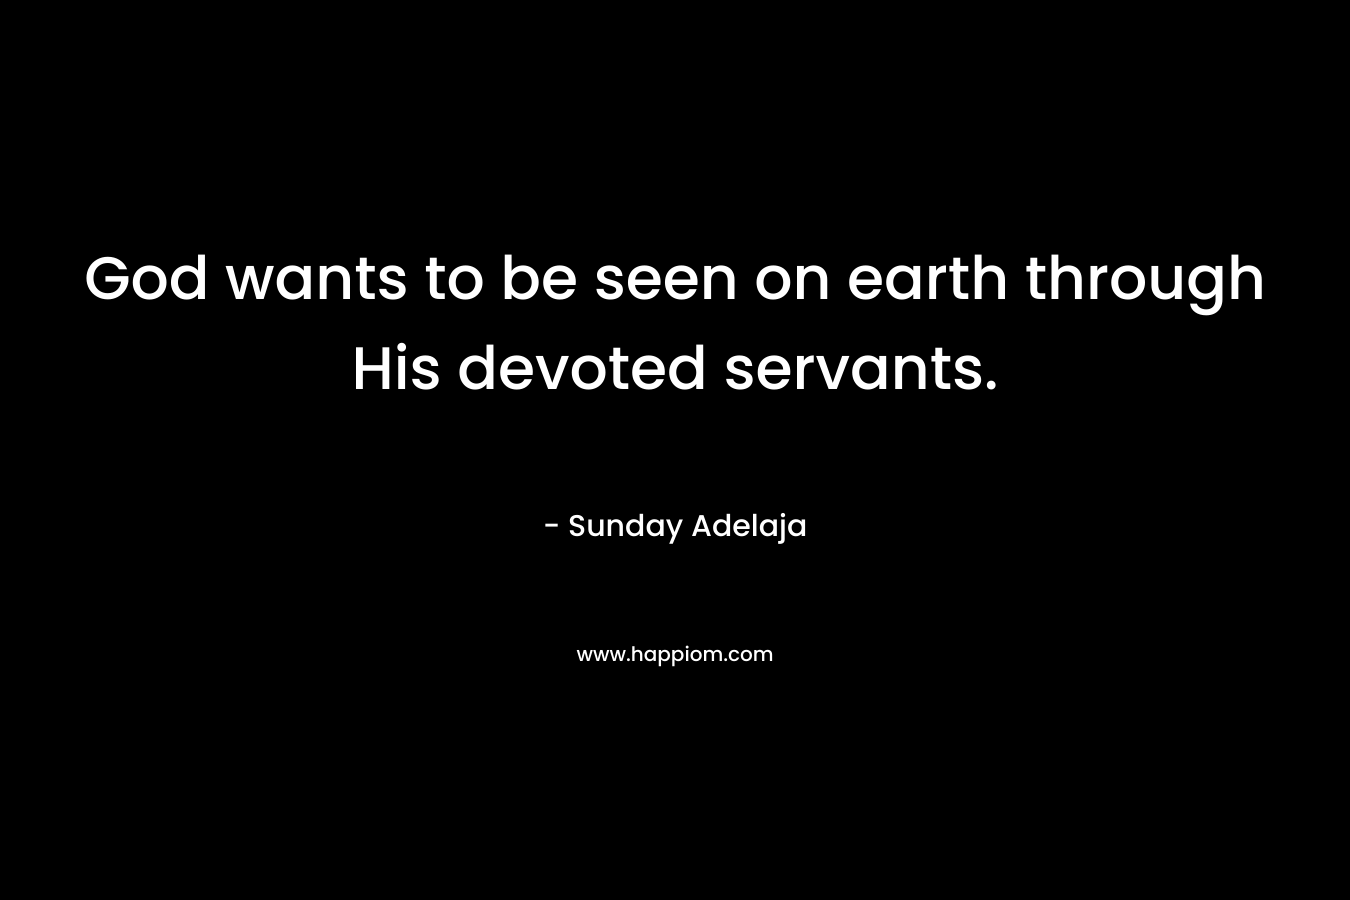 God wants to be seen on earth through His devoted servants.